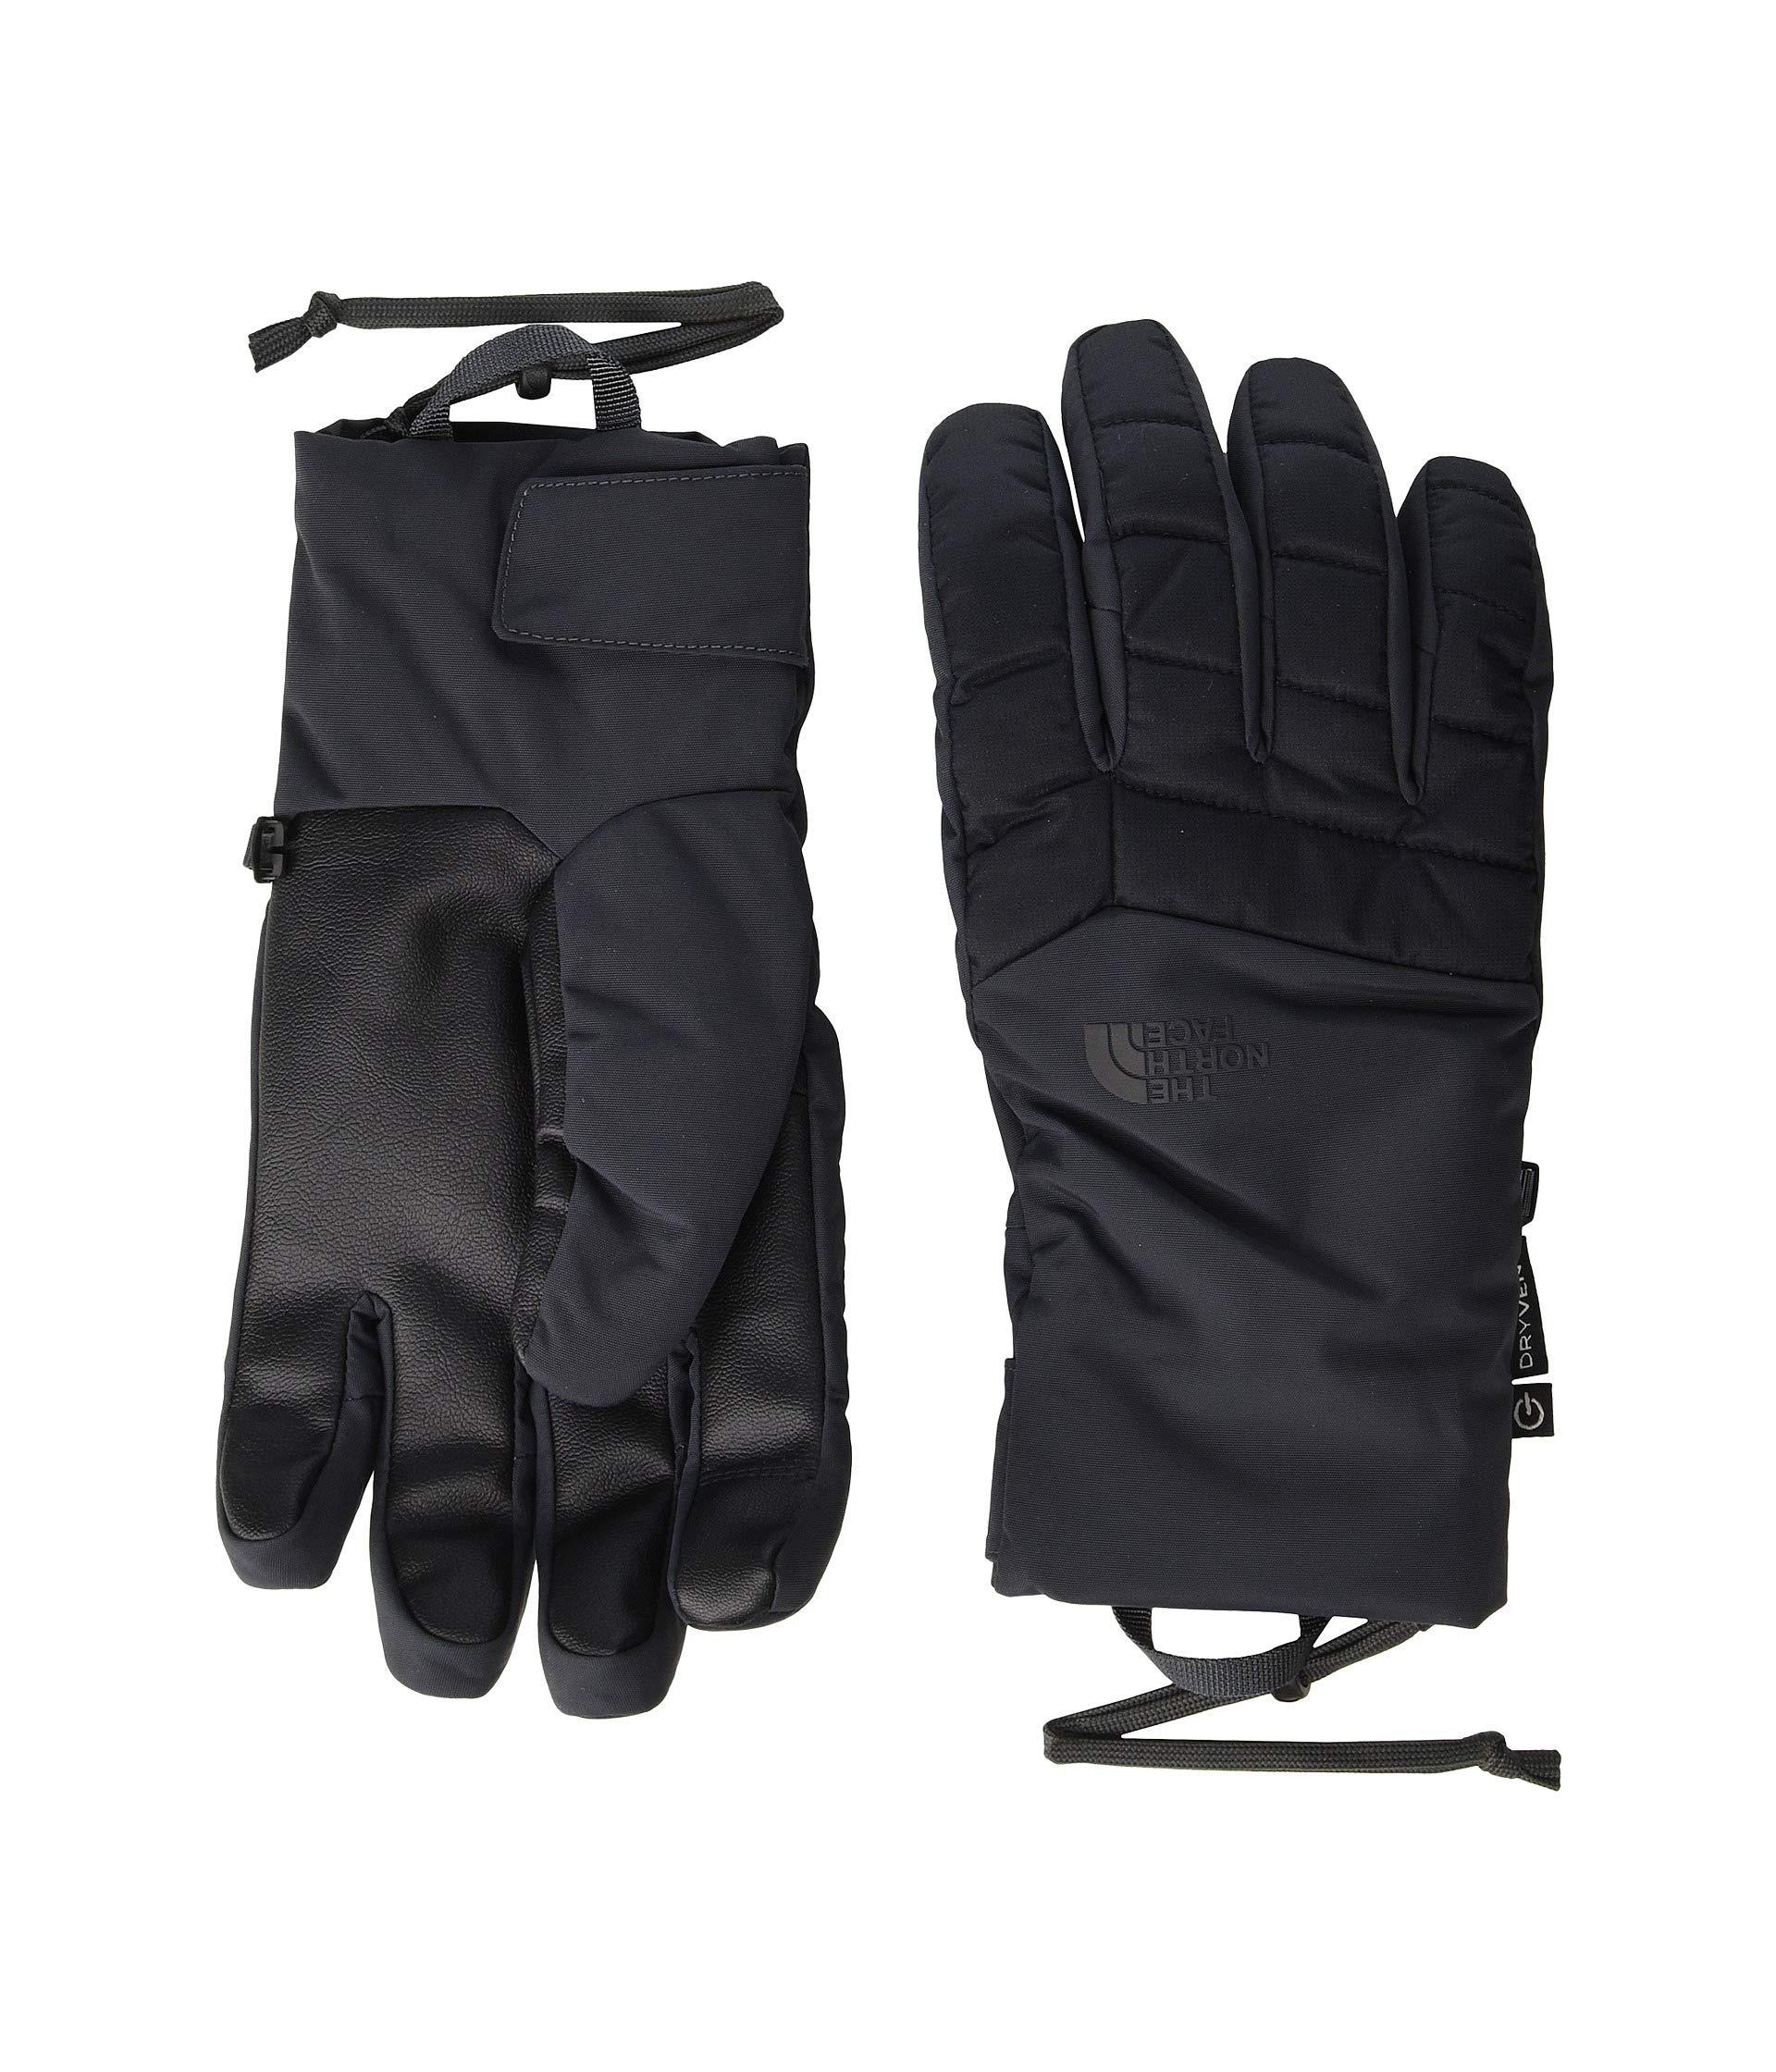 north face cold weather gloves